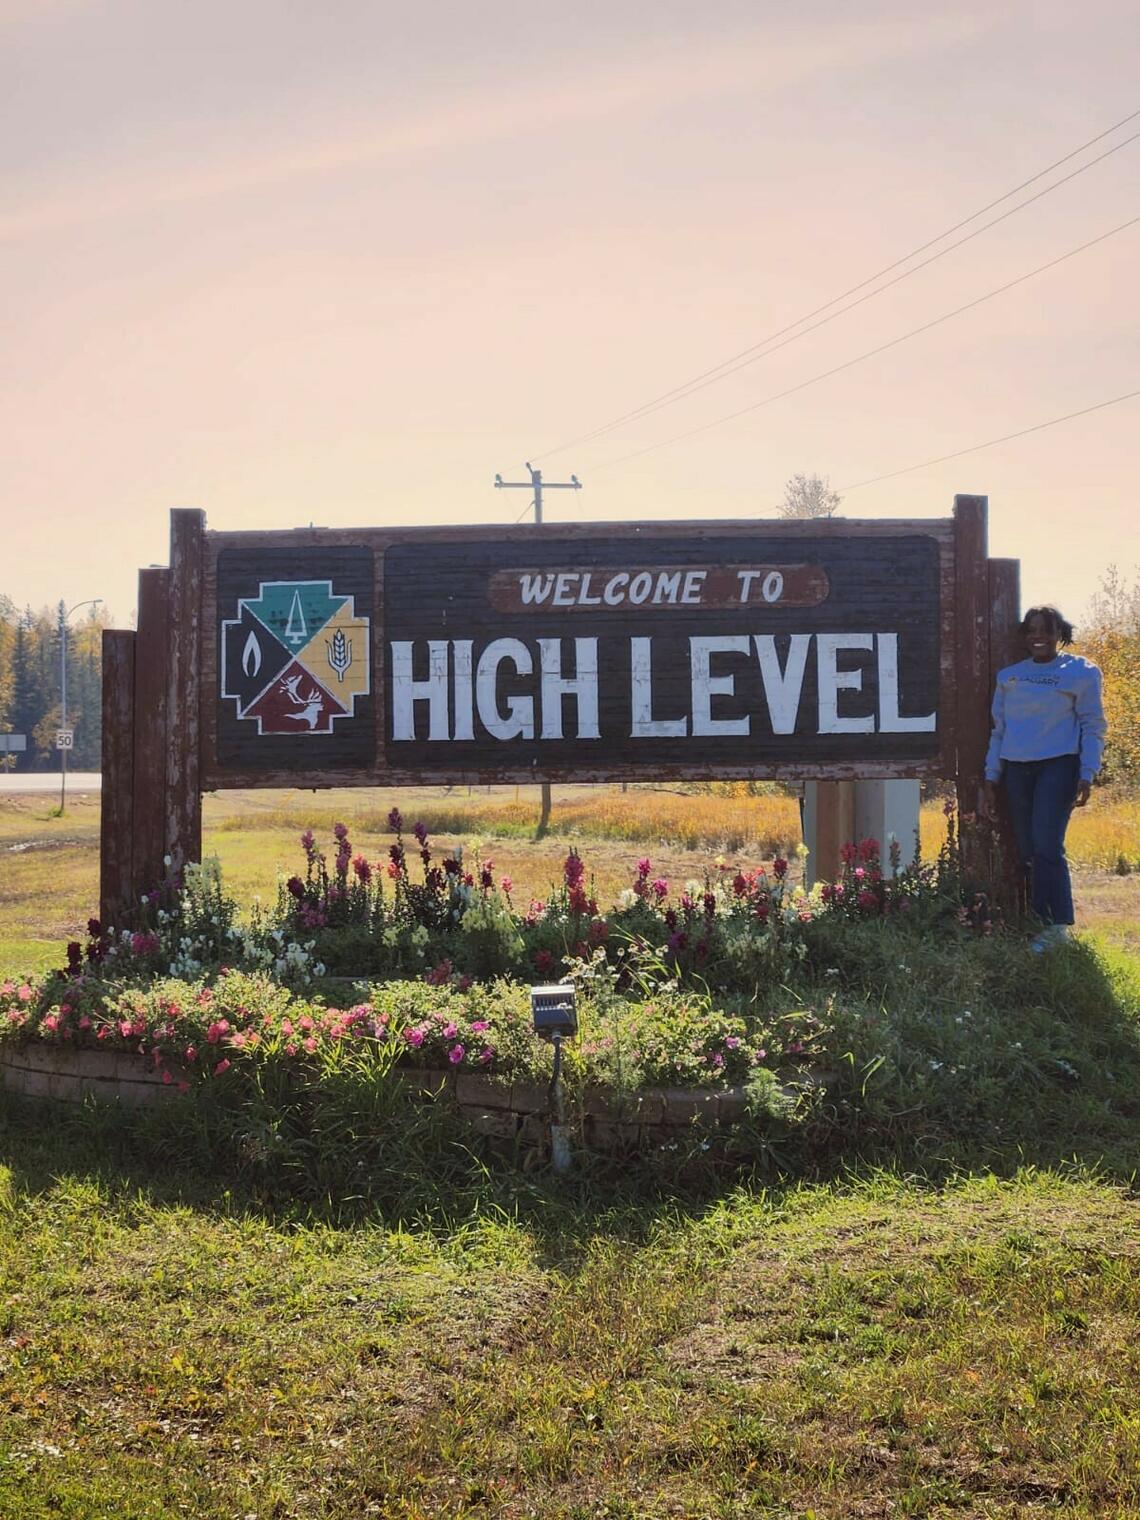 Tolu stands in front of "Welcome to High Level" sign